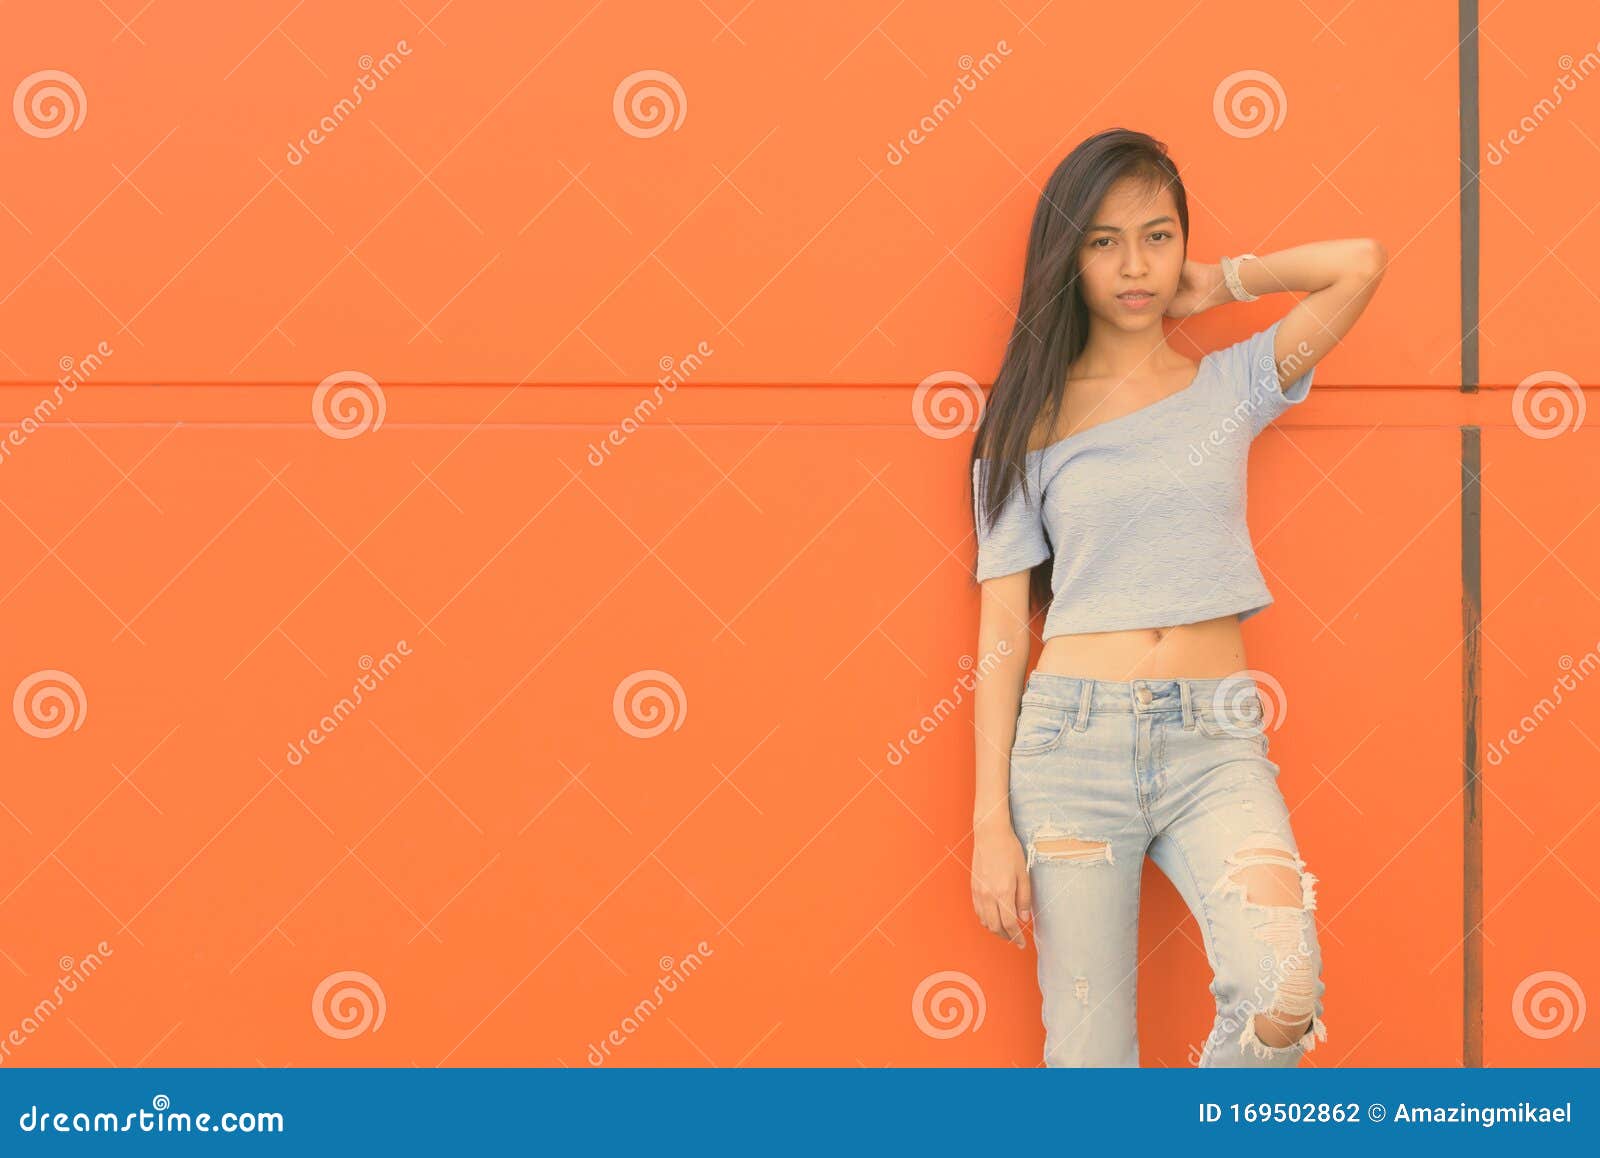 Young Beautiful Asian Teenage Girl Against Orange Wall Stoc